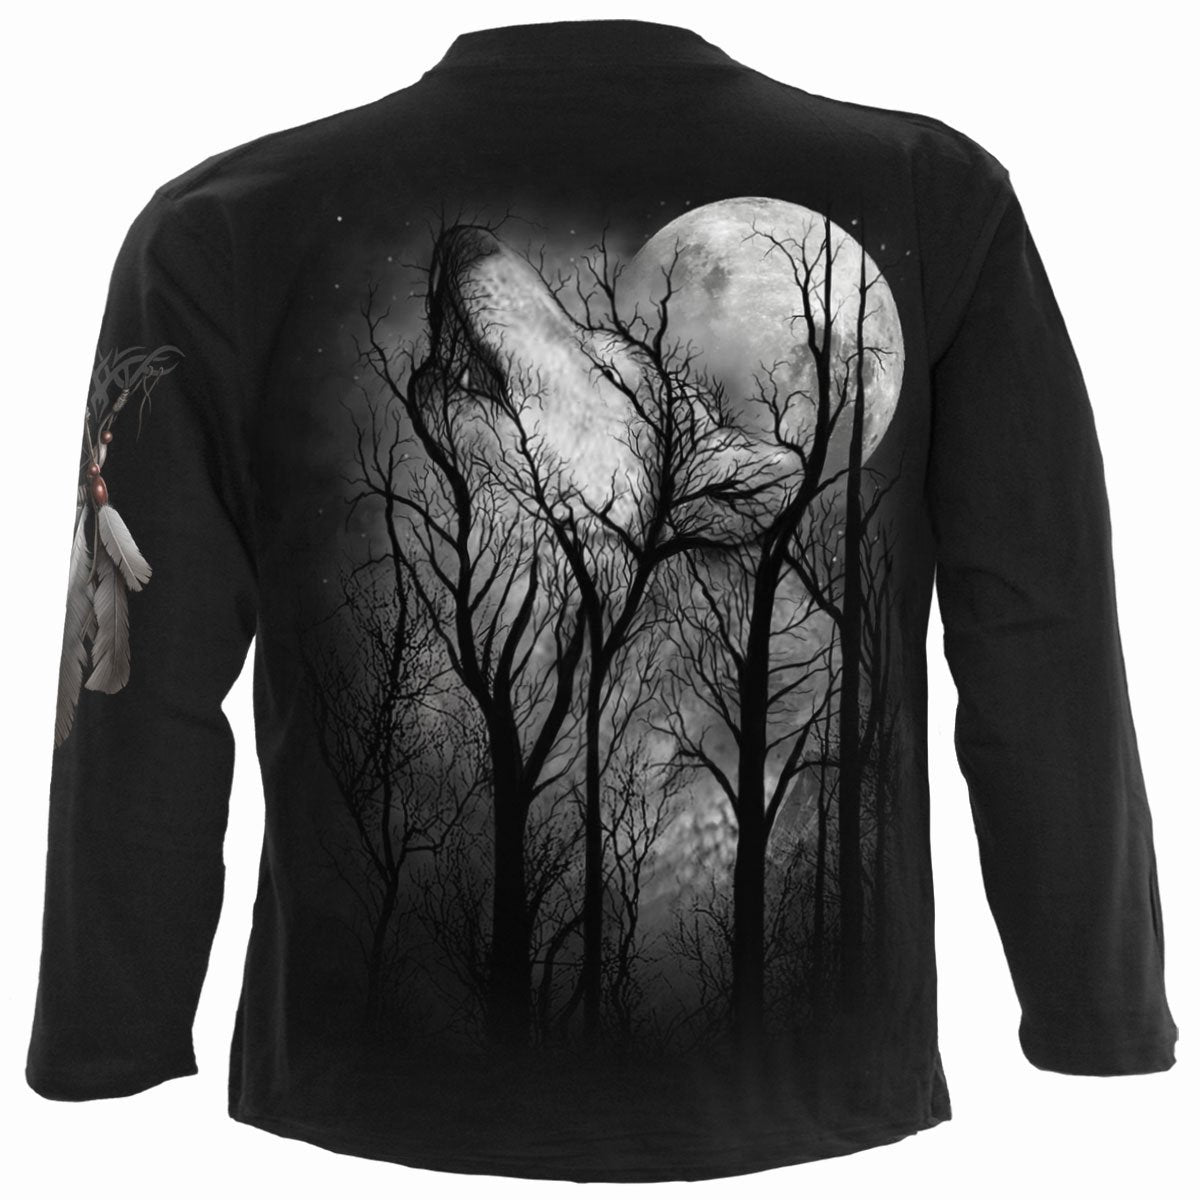 wolf howling at a full moon in a forest long sleeve black crew neck shirt for men